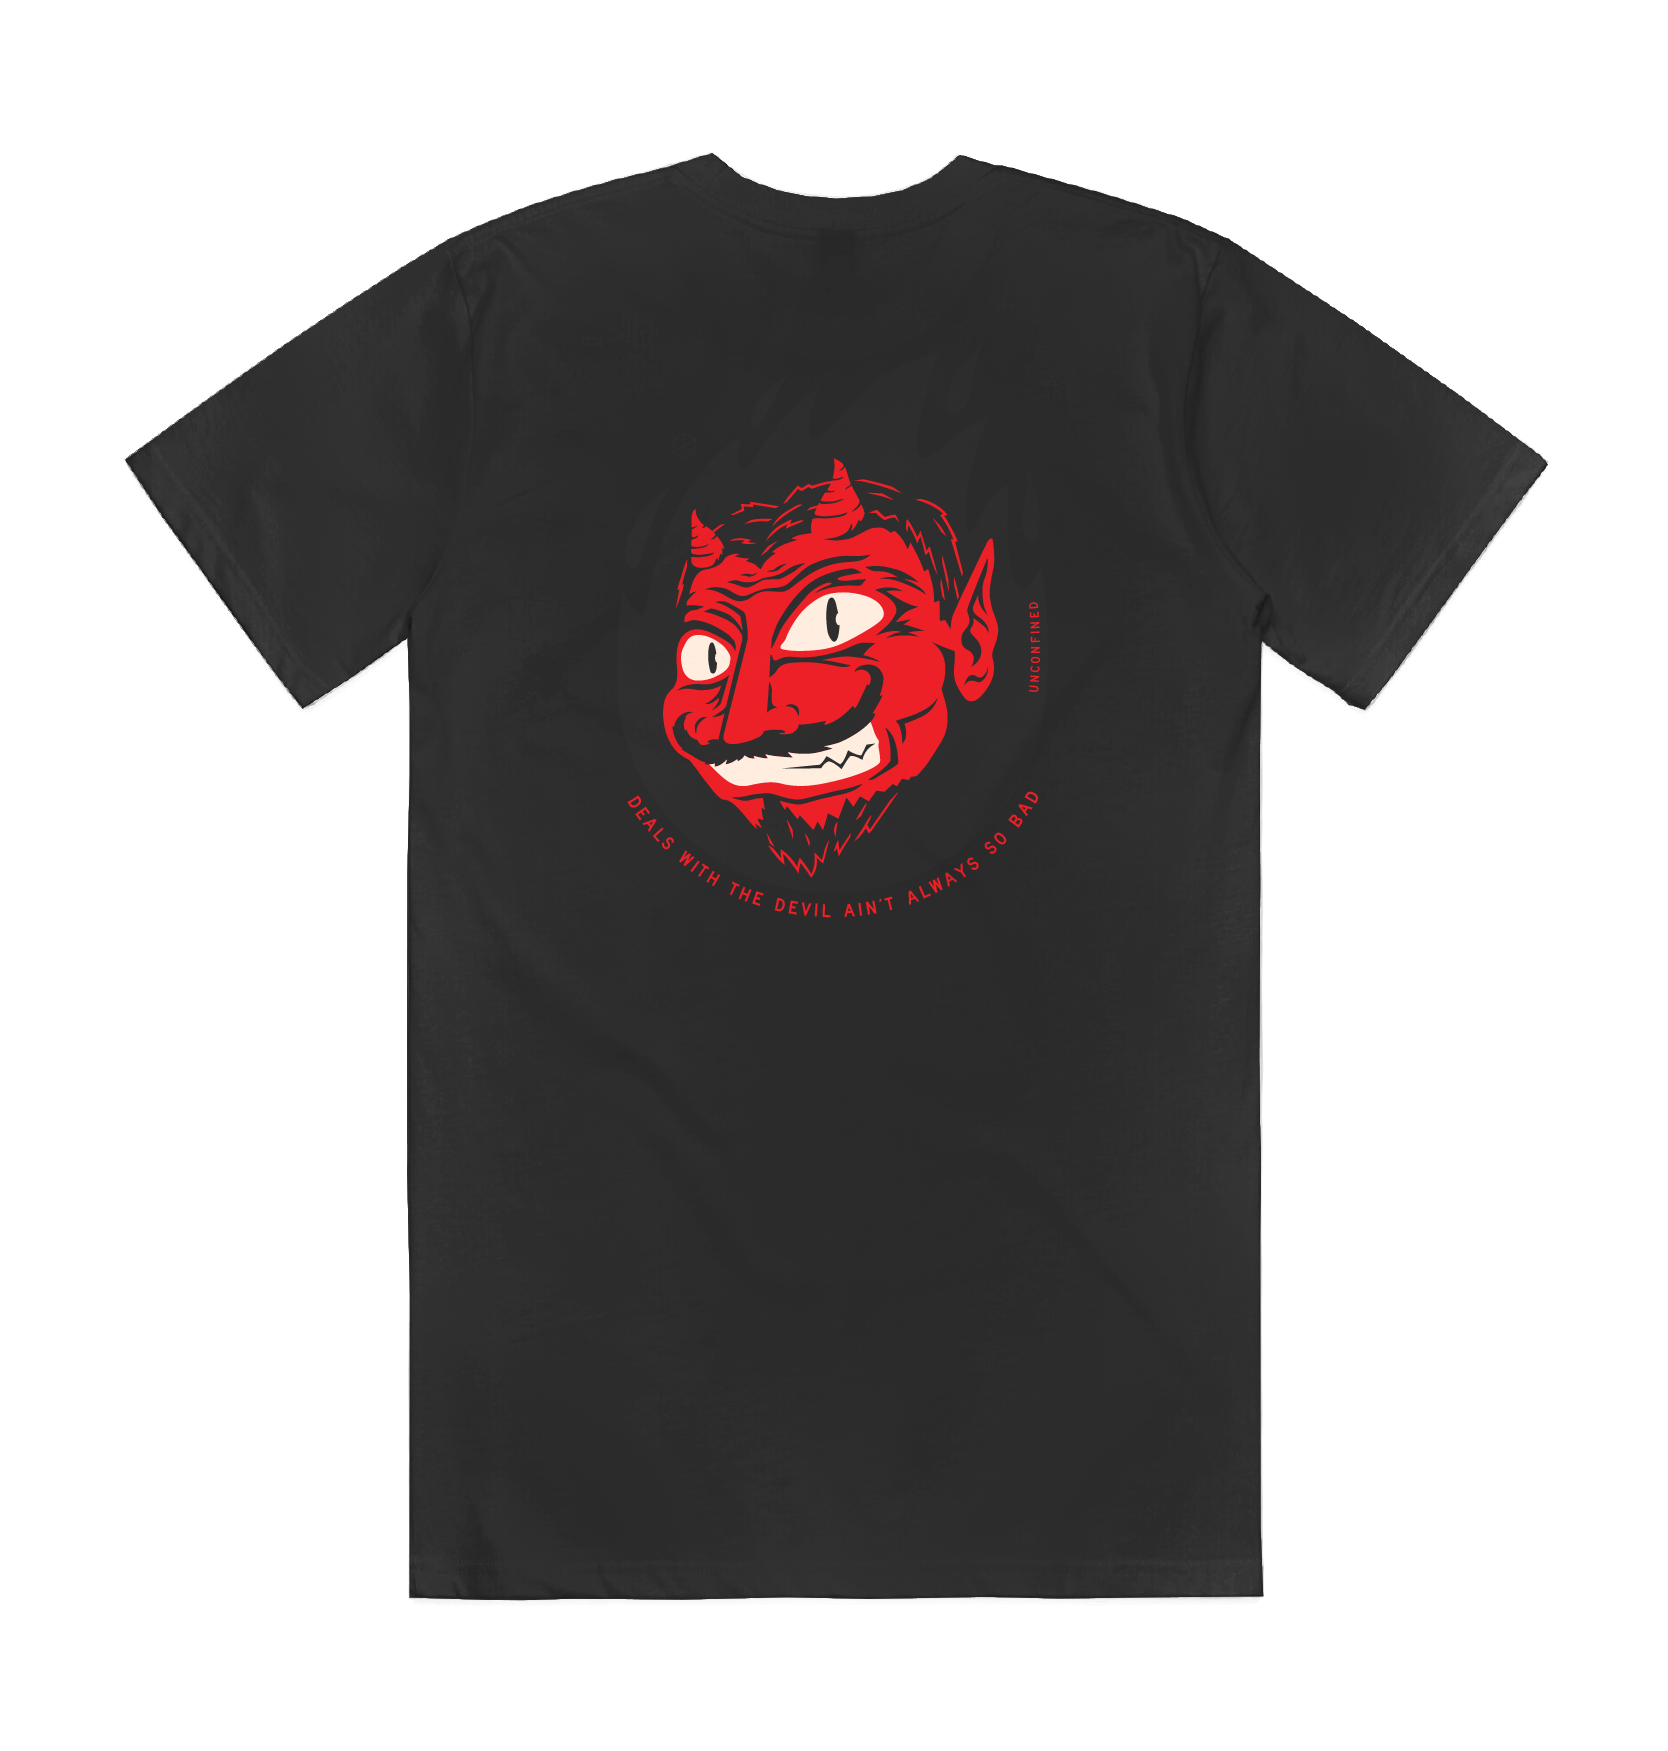 Deals with the Devil Graphic T-Shirt